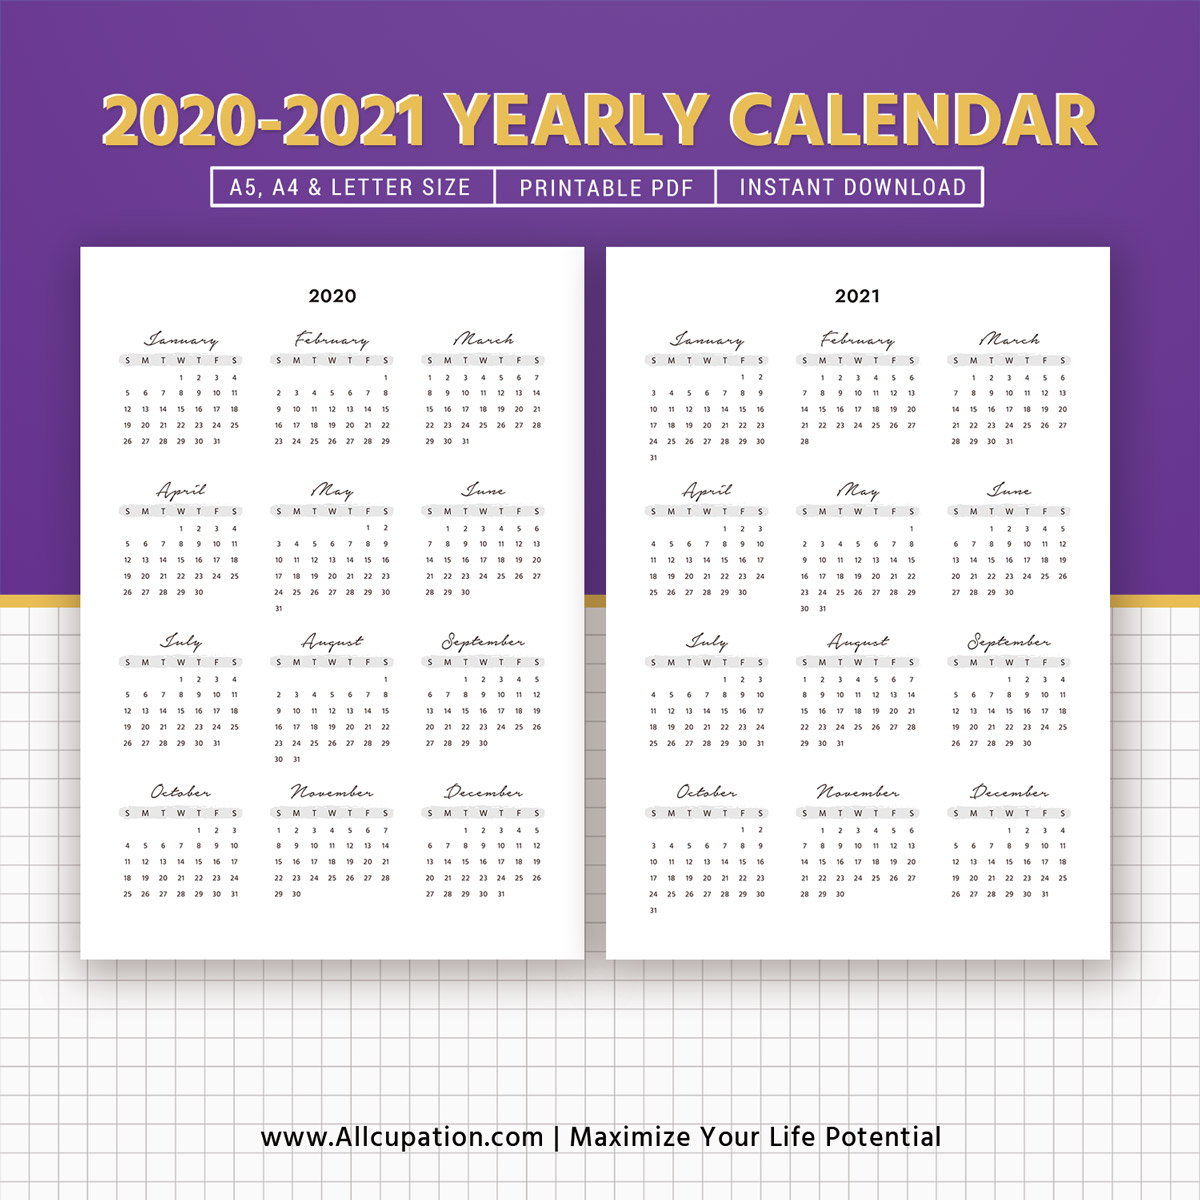 2020 2021 Yearly Calendar Year At A Glance Printable 1